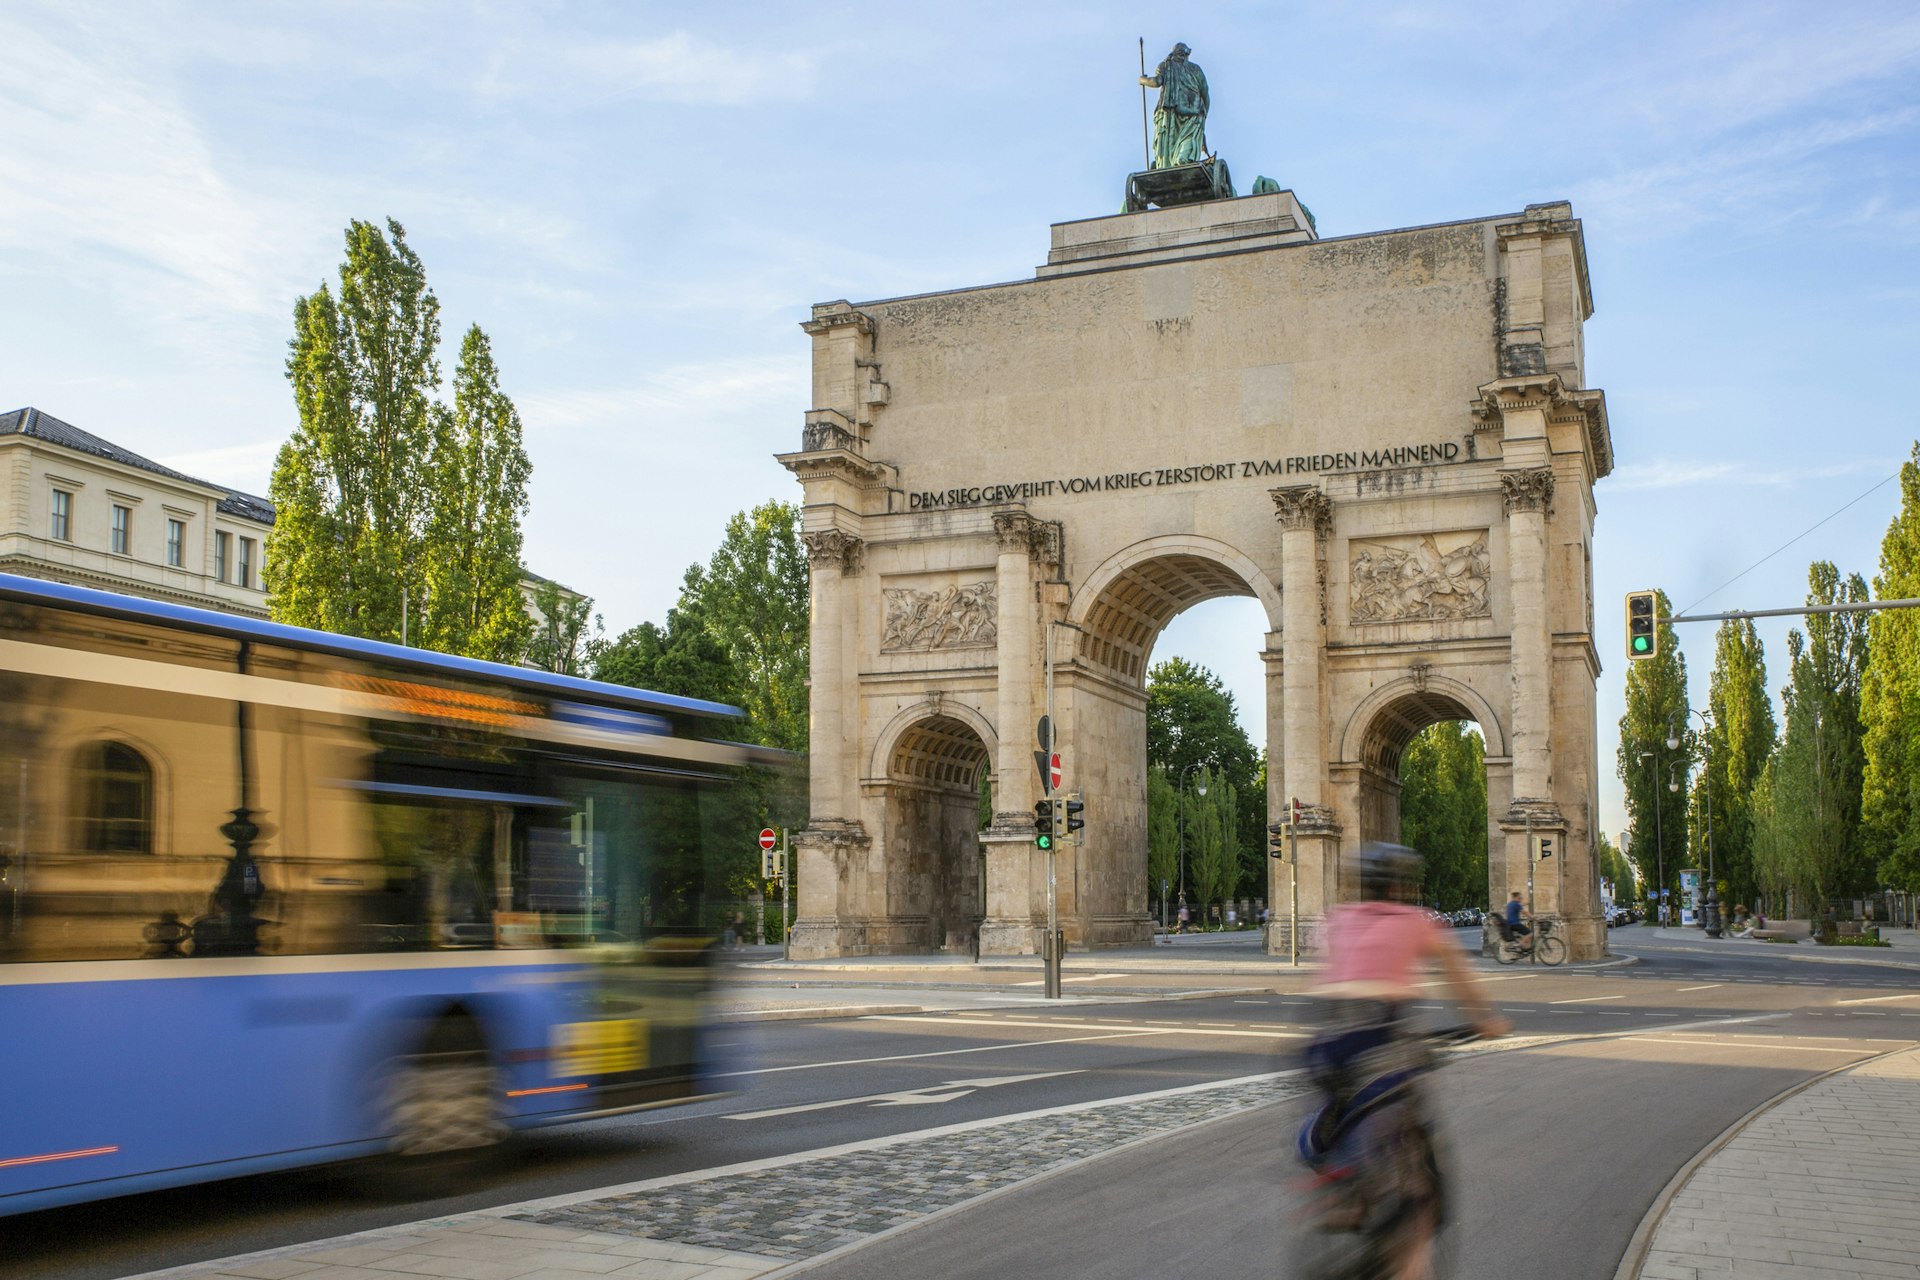 A cyclist and bus in blurred motion as they speed past an ornamental arch in a city